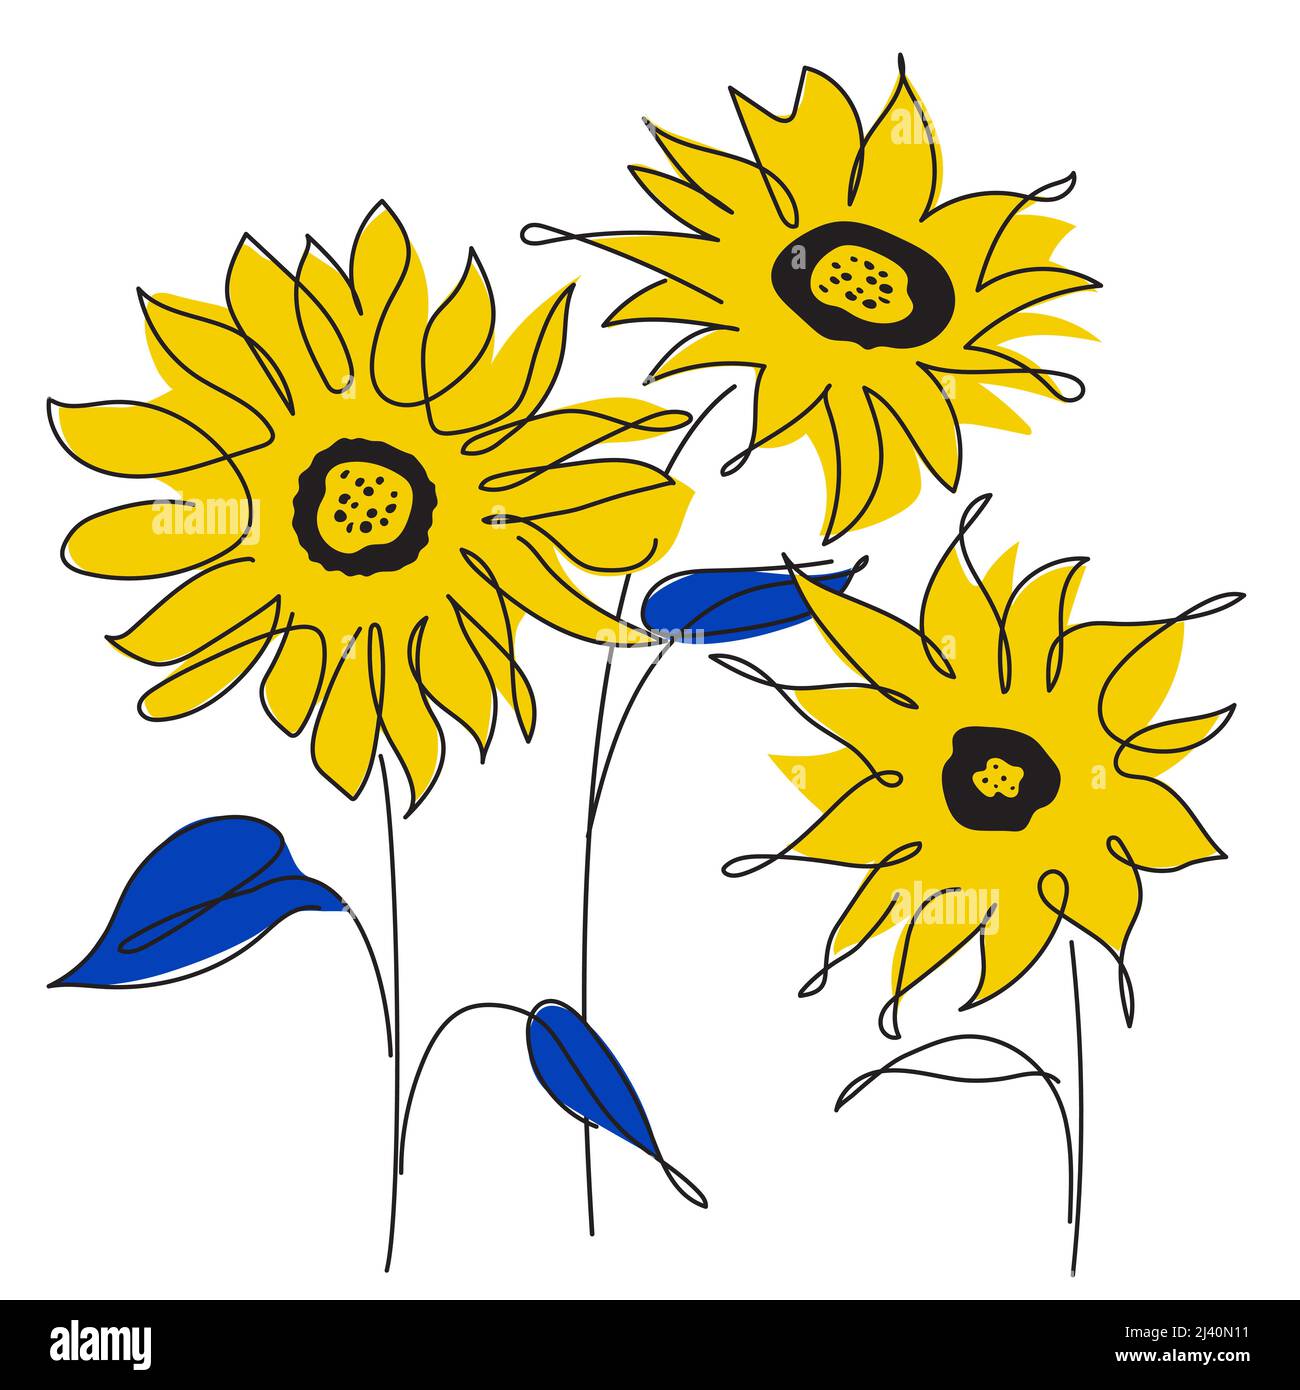 Vector illustration with Ukraine tradition flower, sunflower. Global politics, NO WAR, aggression problem picture in continuous line art style Stock Vector